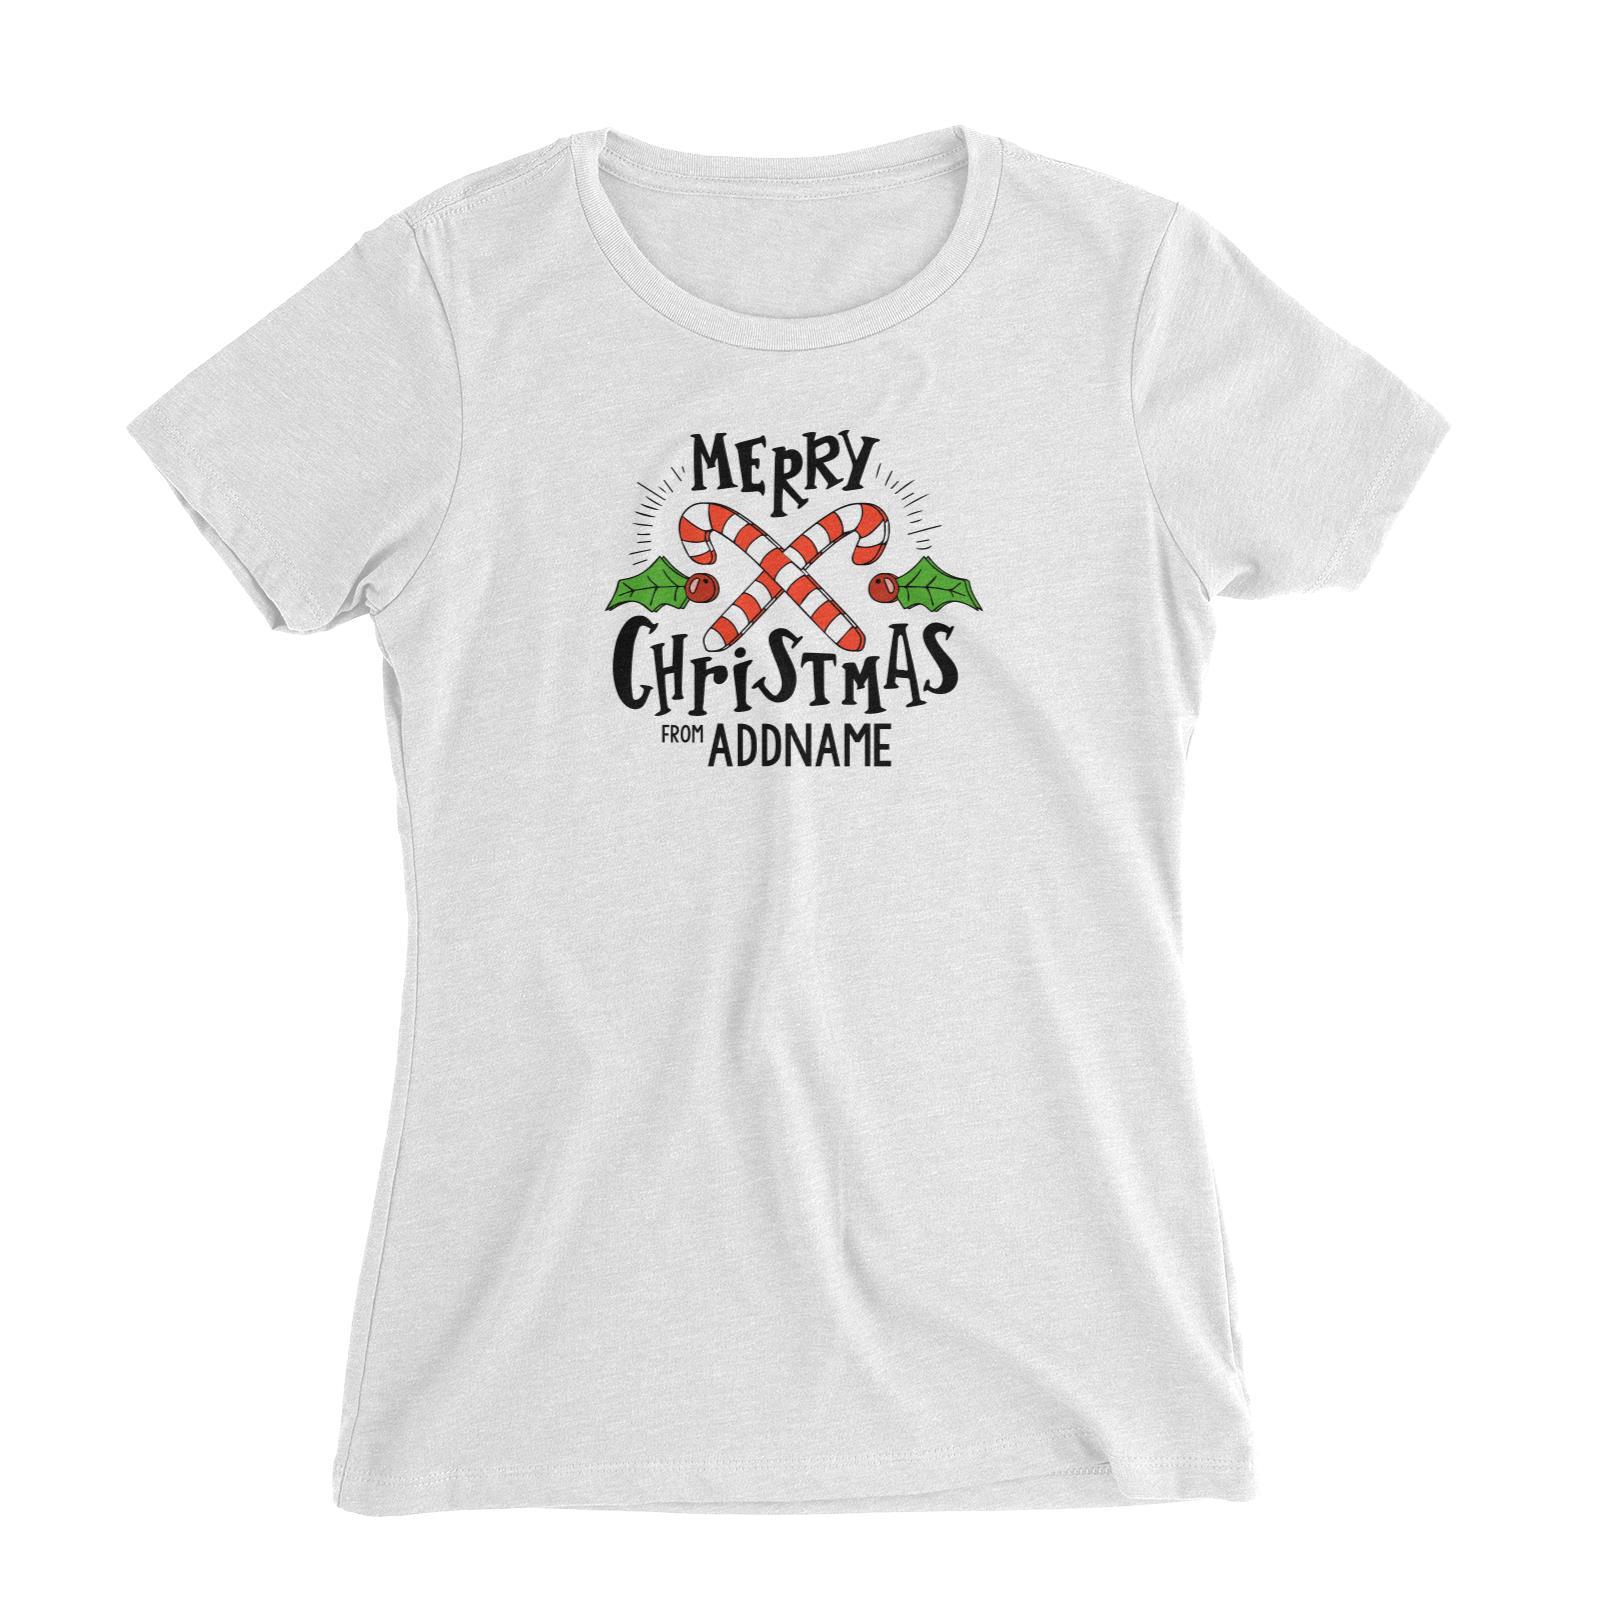 Merry Chrismas with Holly and Candy Cane Greeting Addname Women's Slim Fit T-Shirt Christmas Matching Family Personalizable Designs Lettering